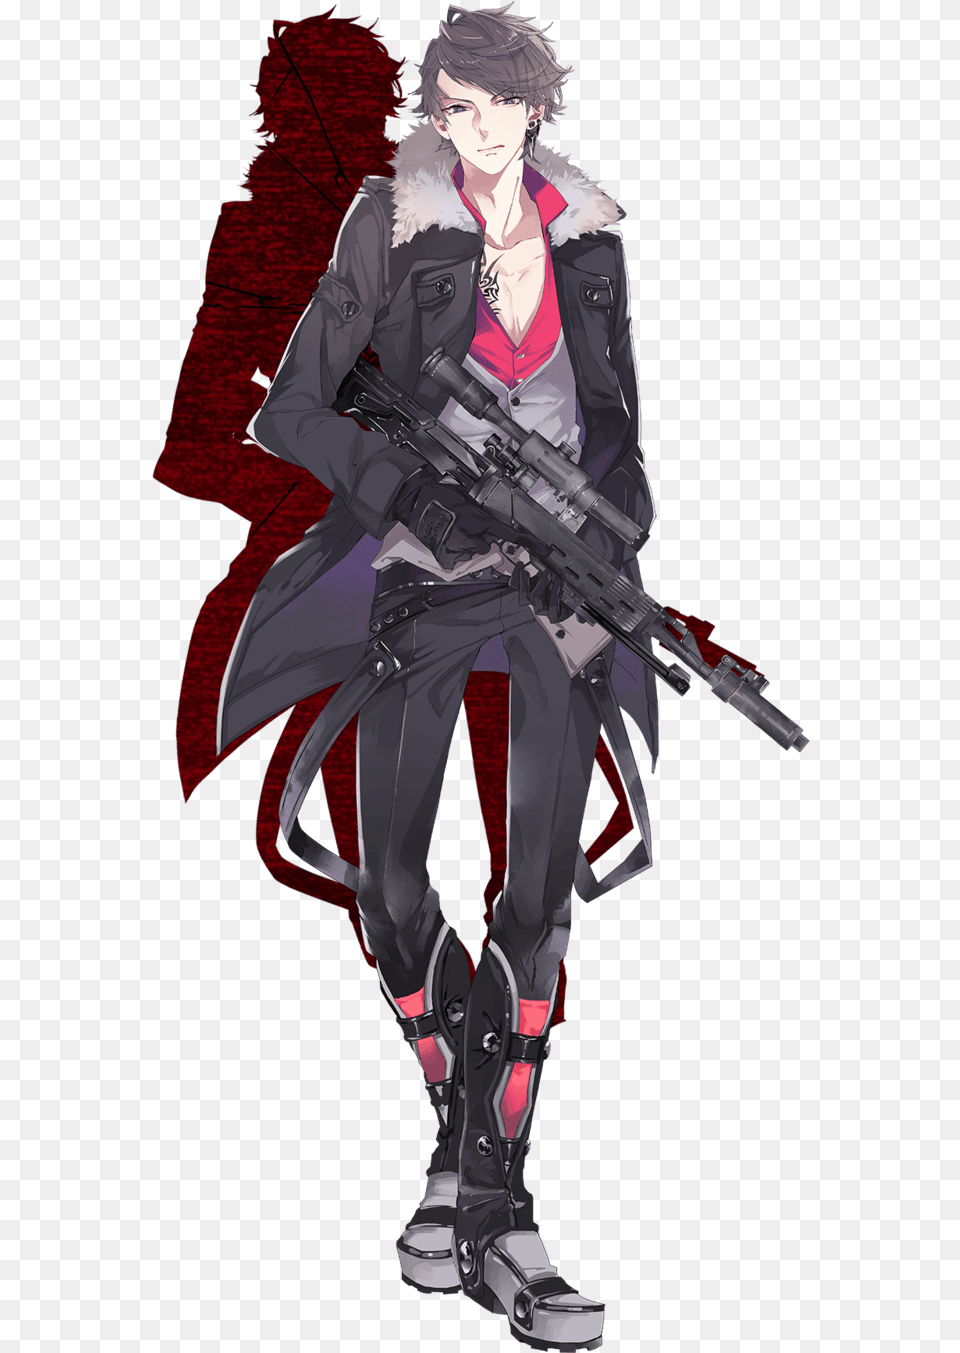 Anime Guy With Gun Anime Guy With Gun, Book, Comics, Publication, Clothing Png Image